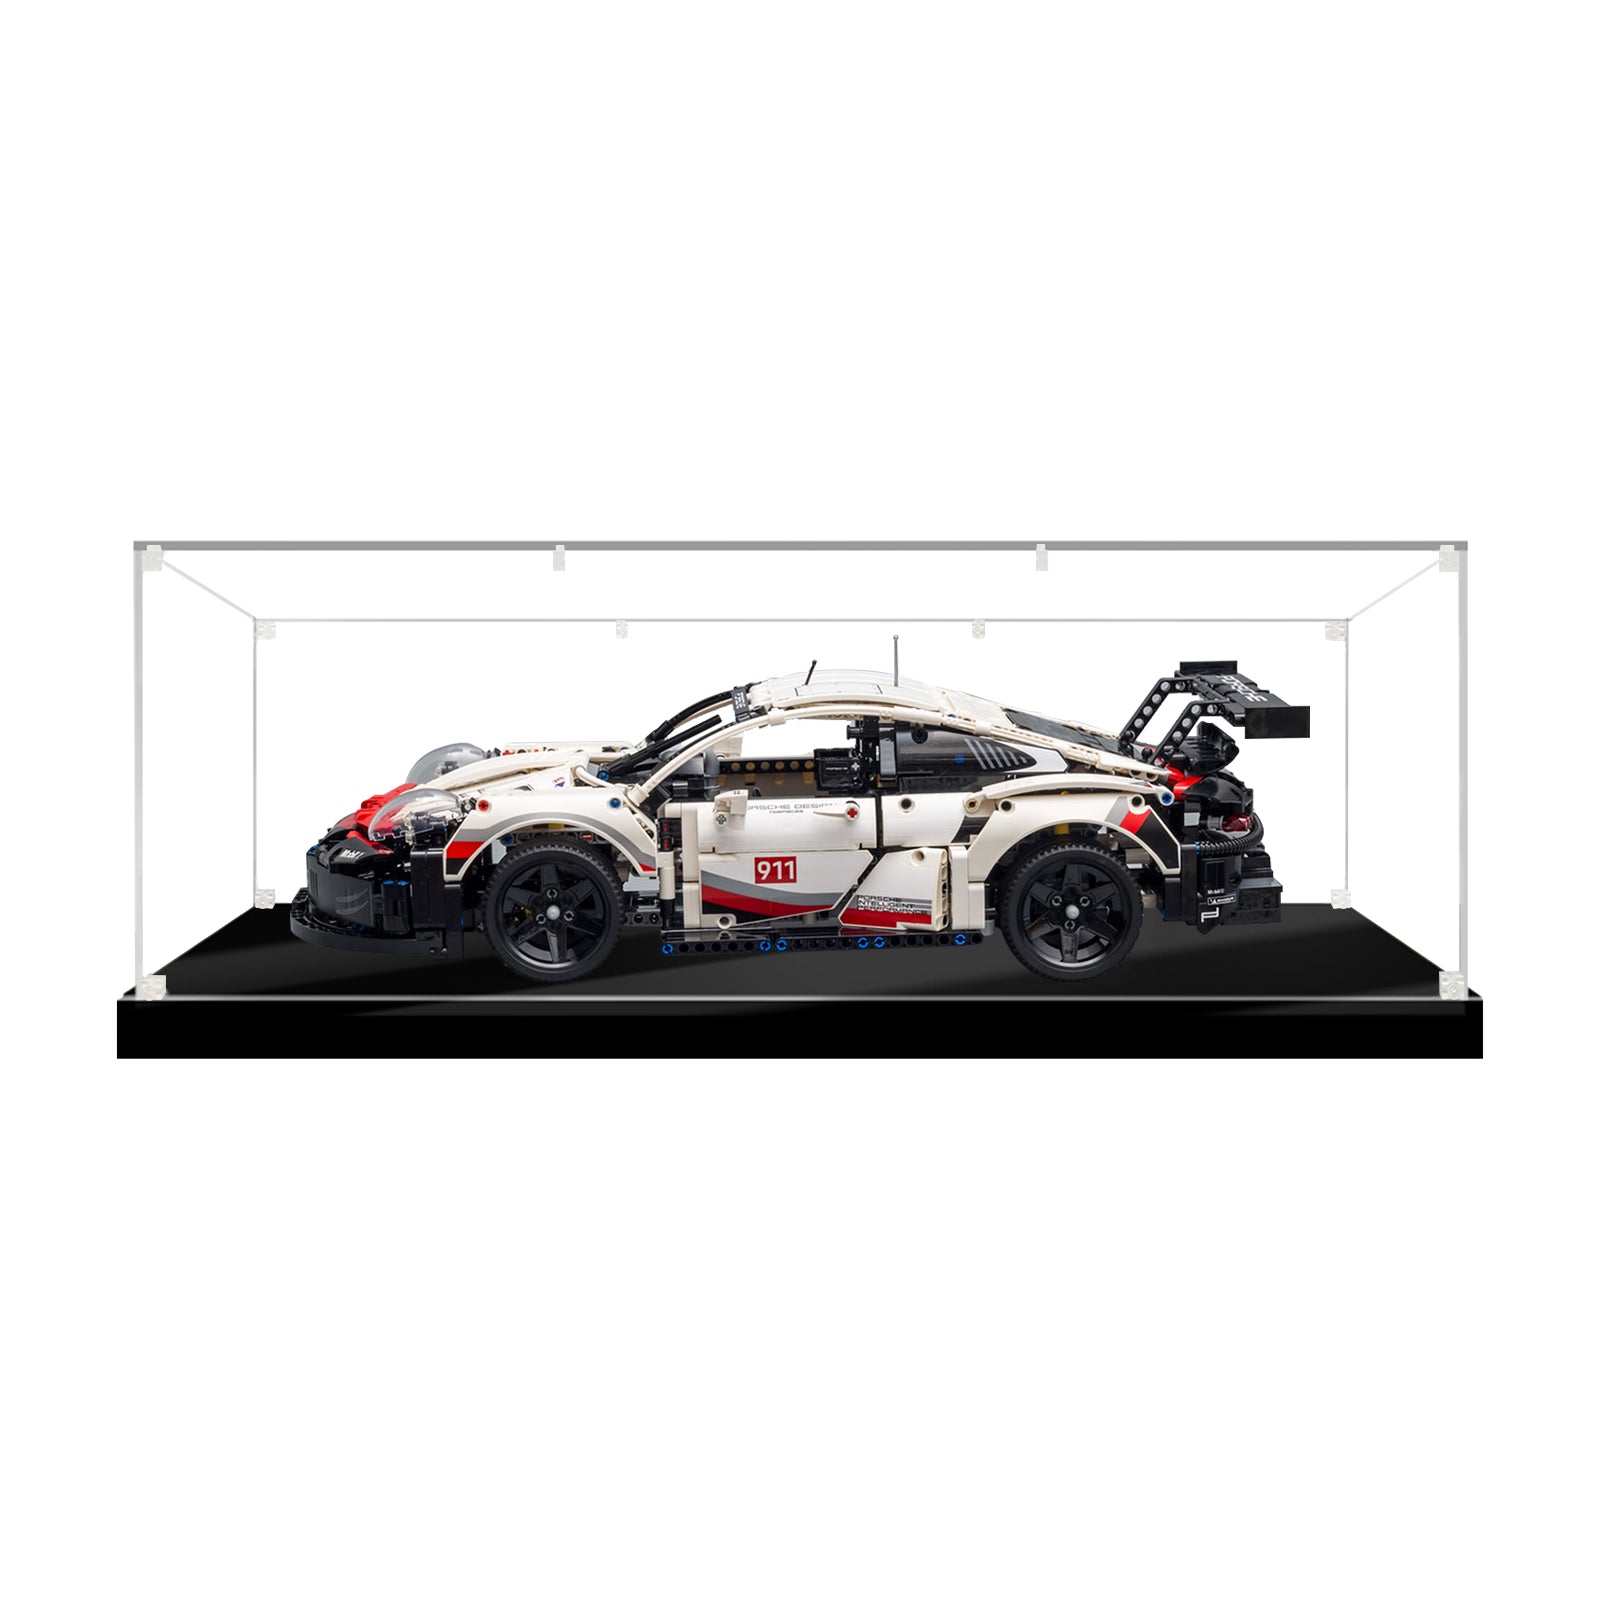 Acrylic display box for 1:8 model car LEGO for 42083 42096 42125 42056 42115, oversized, 65x30x20cm/25.59*11.81*7.87in , 6-corner crystal screws thickened base